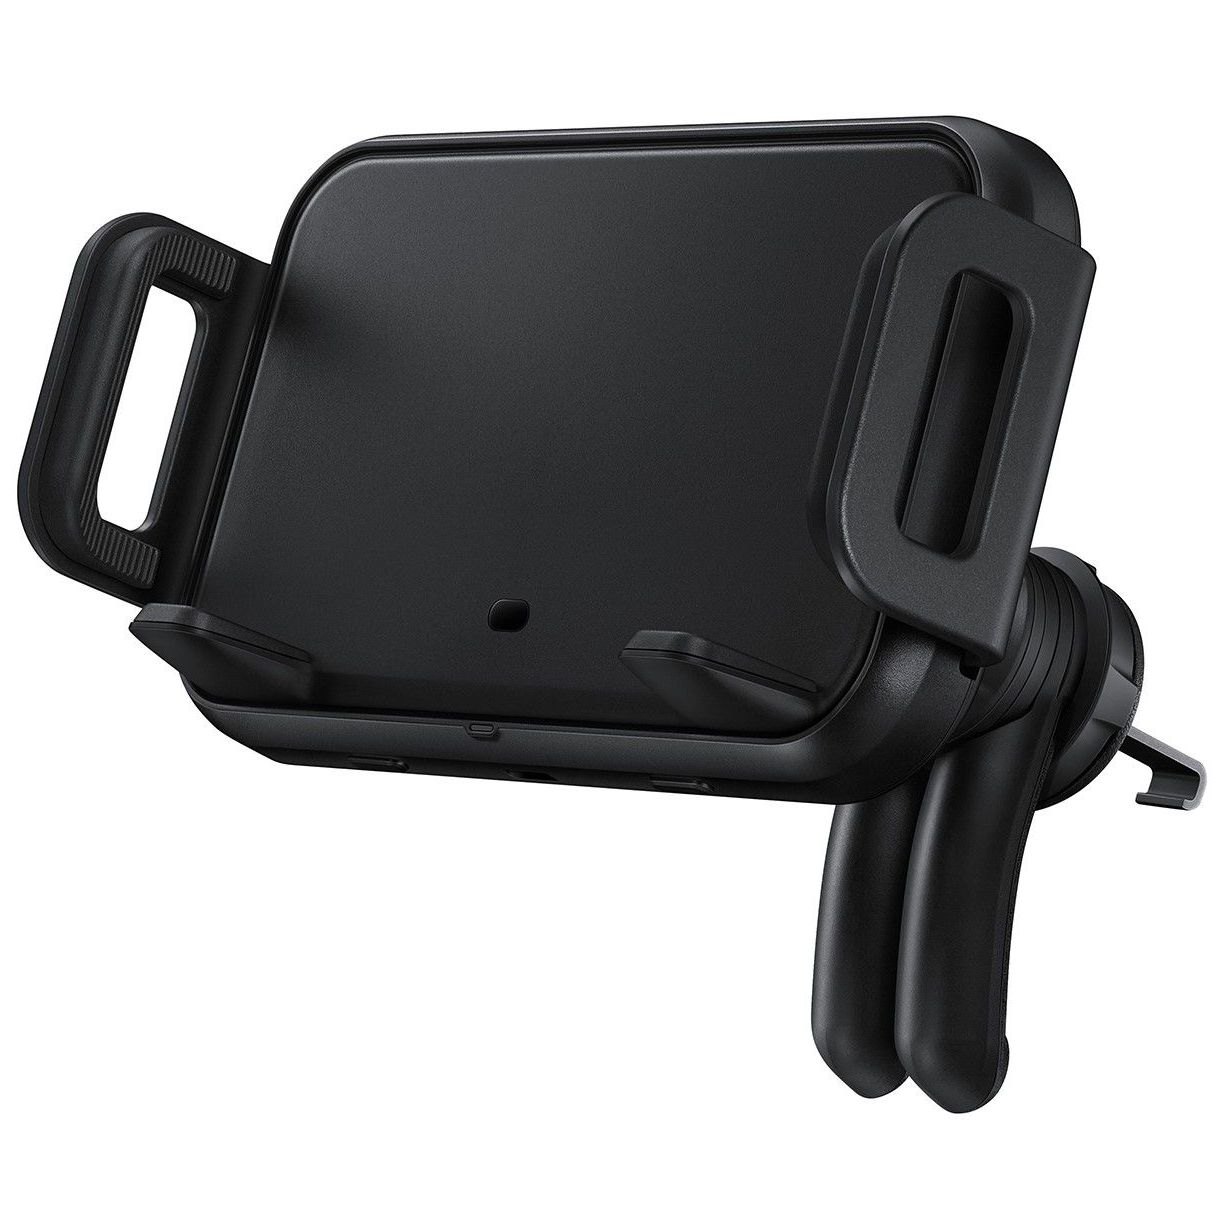 Render of Samsung Wireless Car Charger Phone Mount